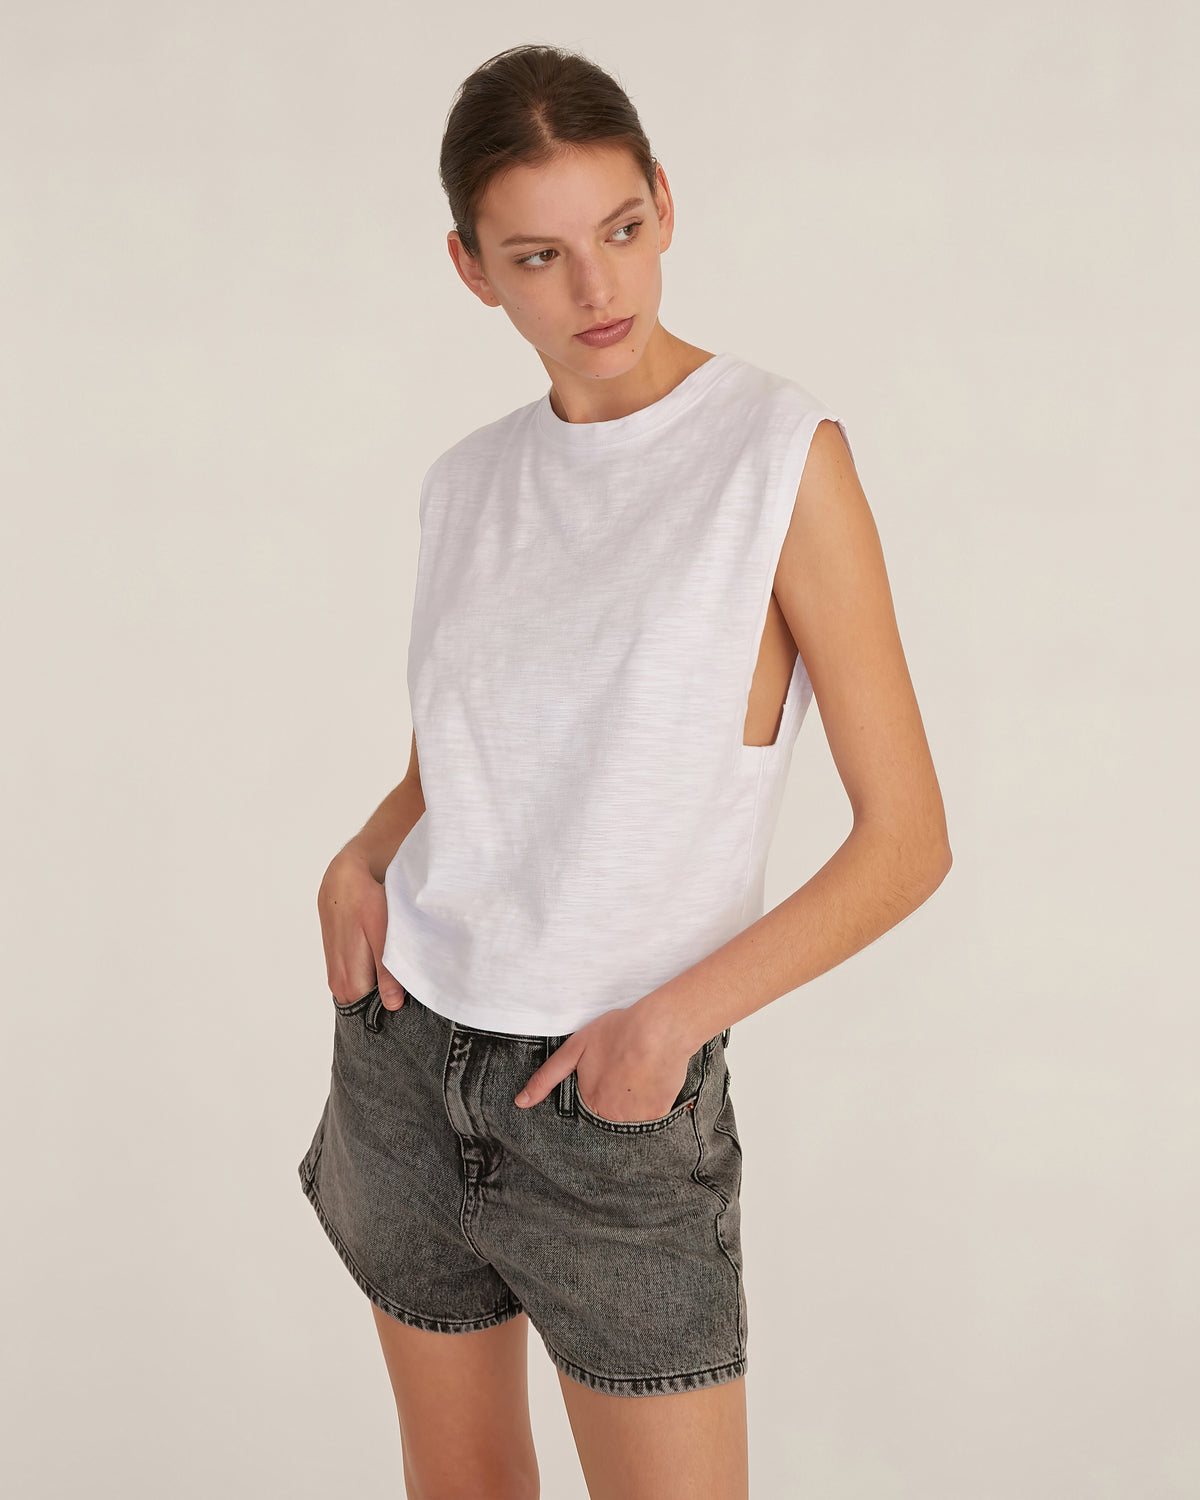 So Relaxed Slub Jersey Muscle Tee in White